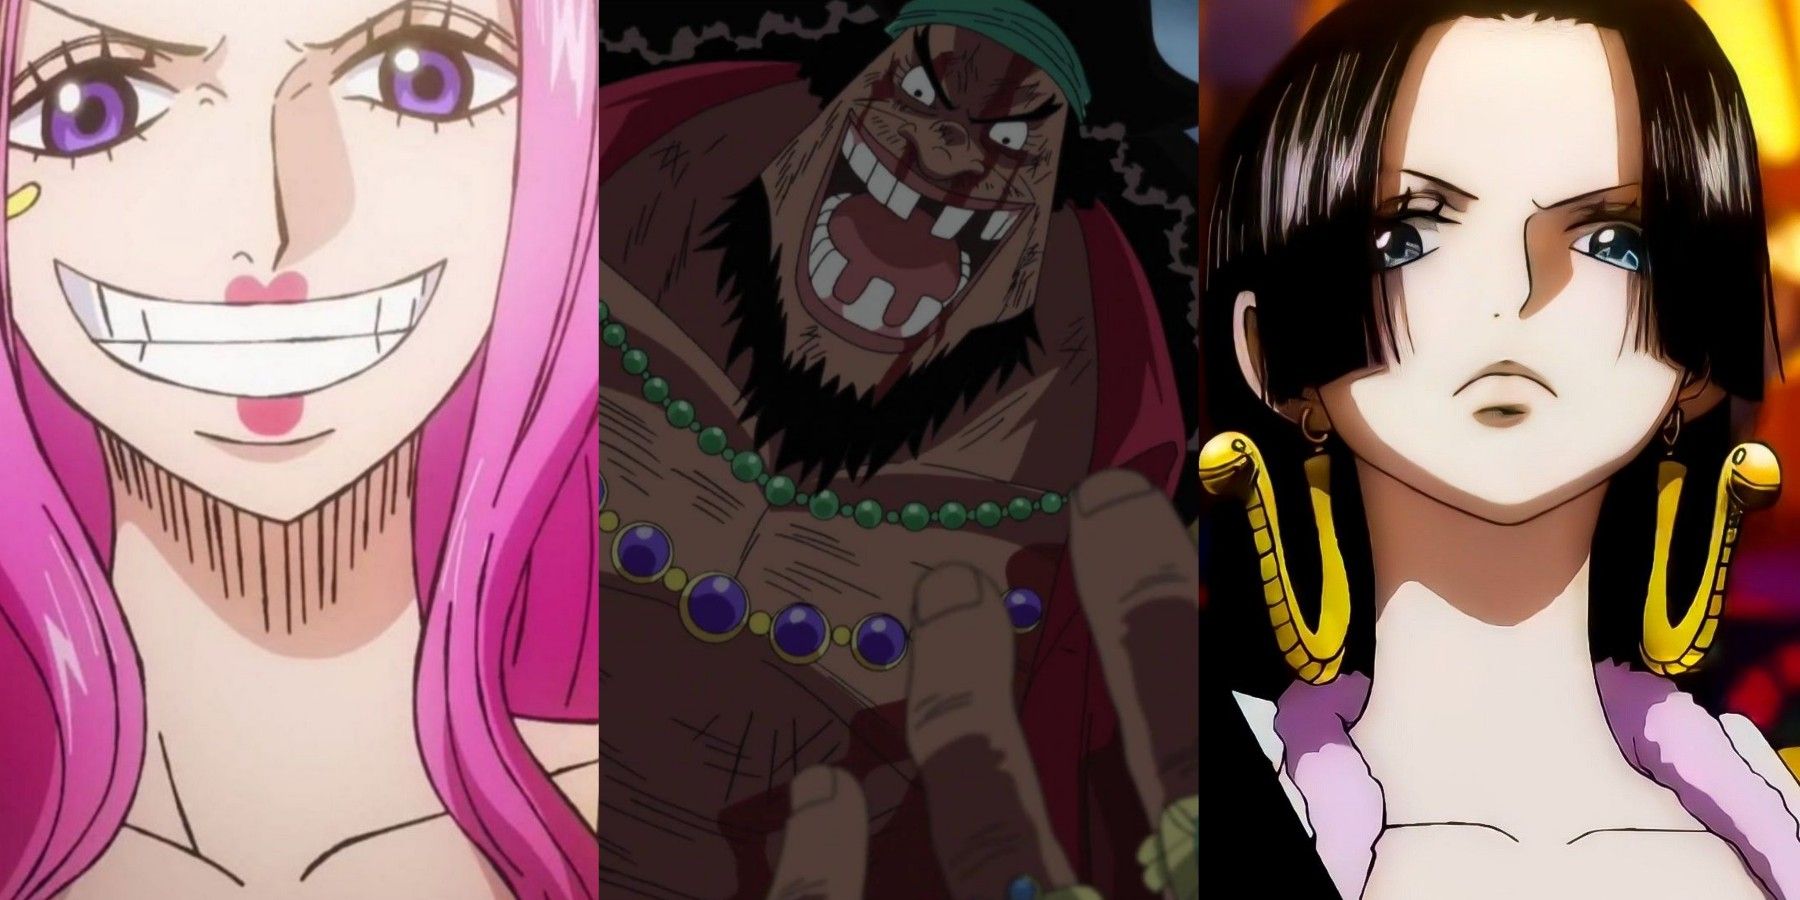 In One Piece, can only one person have the powers of a devil fruit